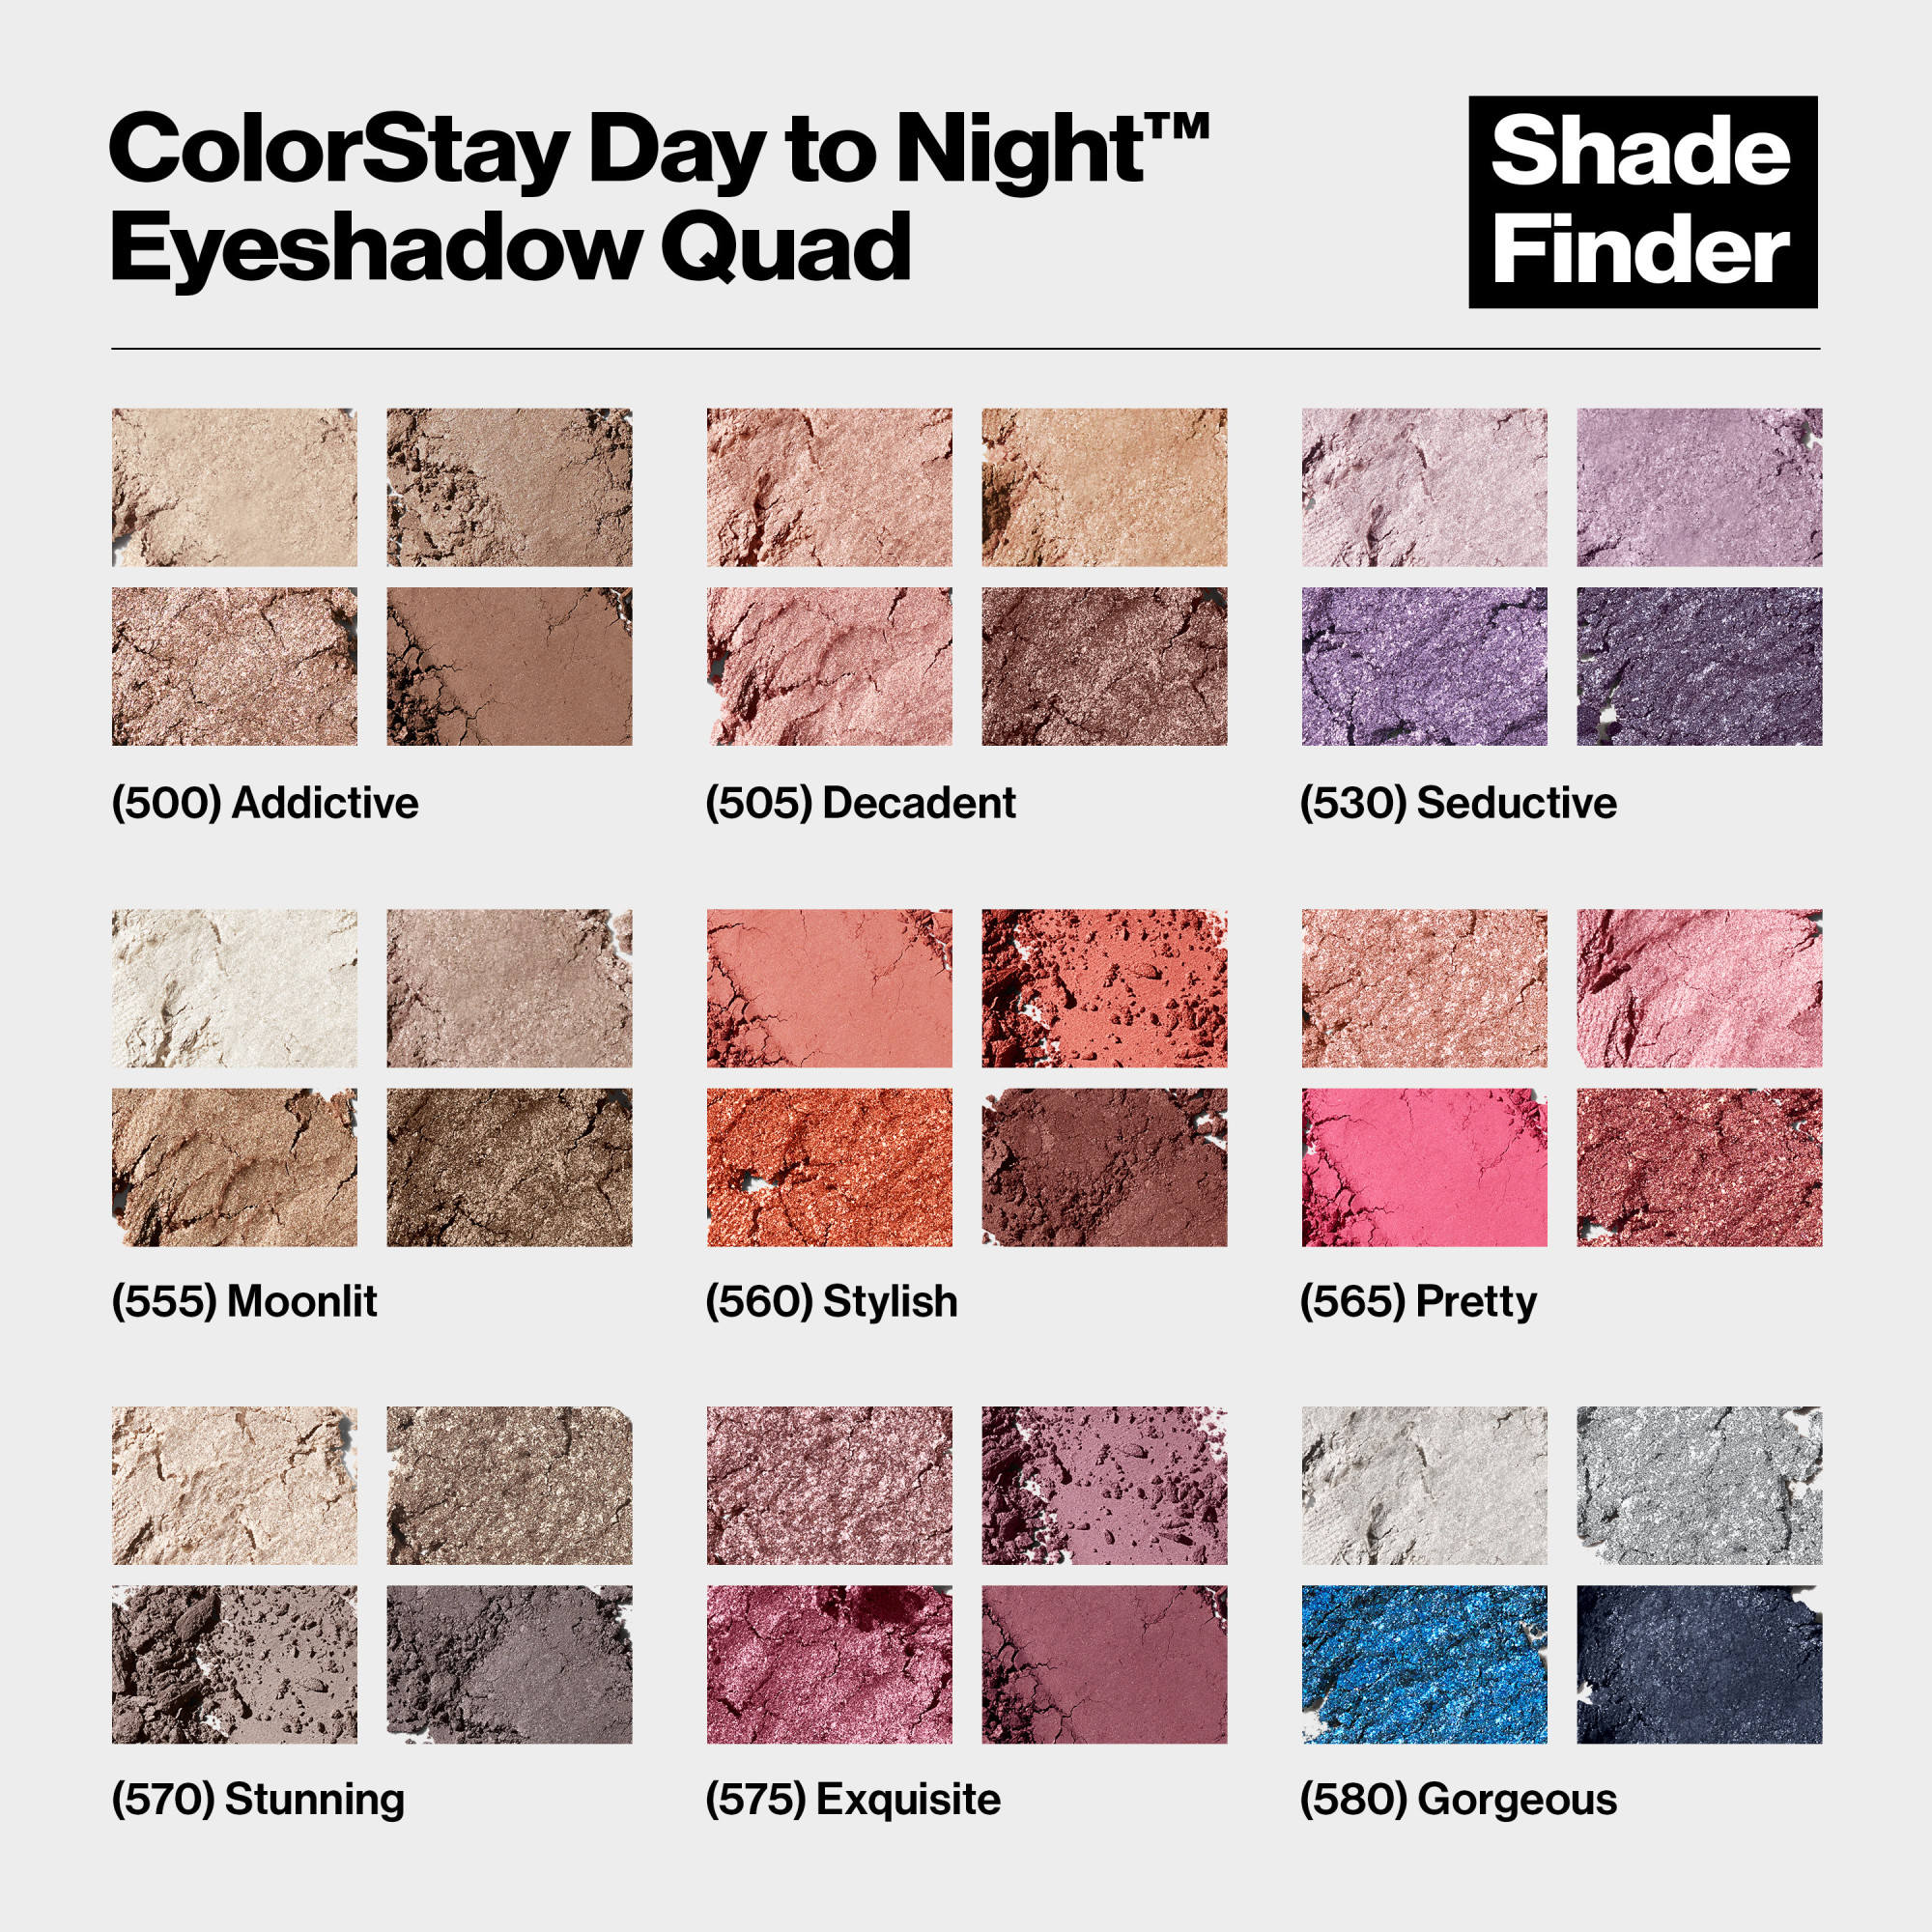 Revlon ColorStay Day to Night Eyeshadow Quad, Longwear Shadow Palette with Transitional Shades and Buttery Soft Feel, Crease & Smudge Proof, 505 Decadent, 0.16 oz - image 10 of 12